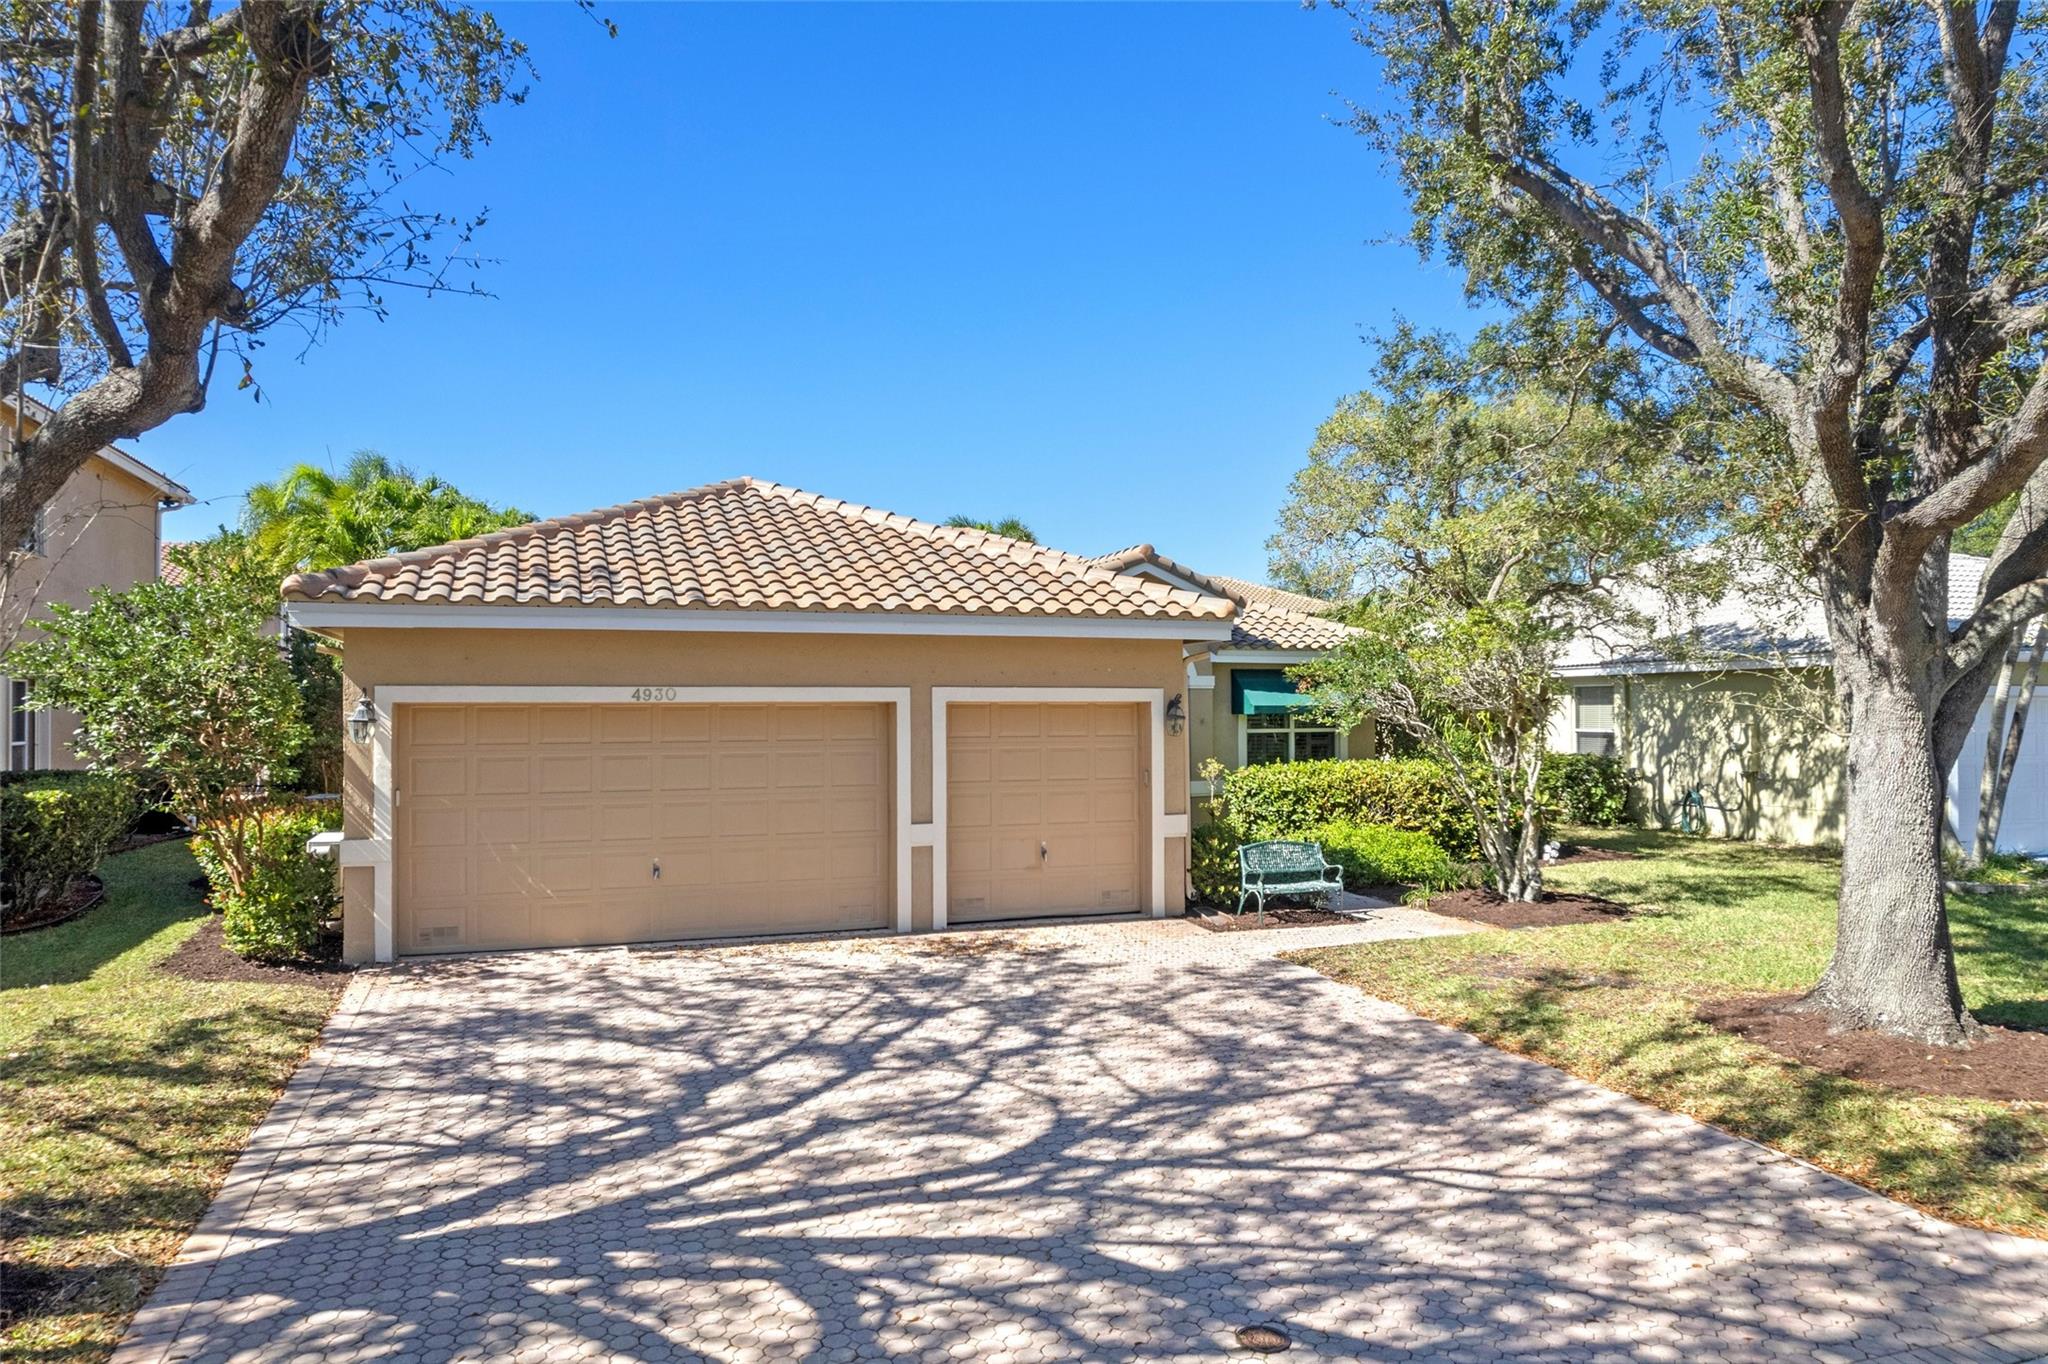 4930 NW 115th Way, Coral Springs, FL 